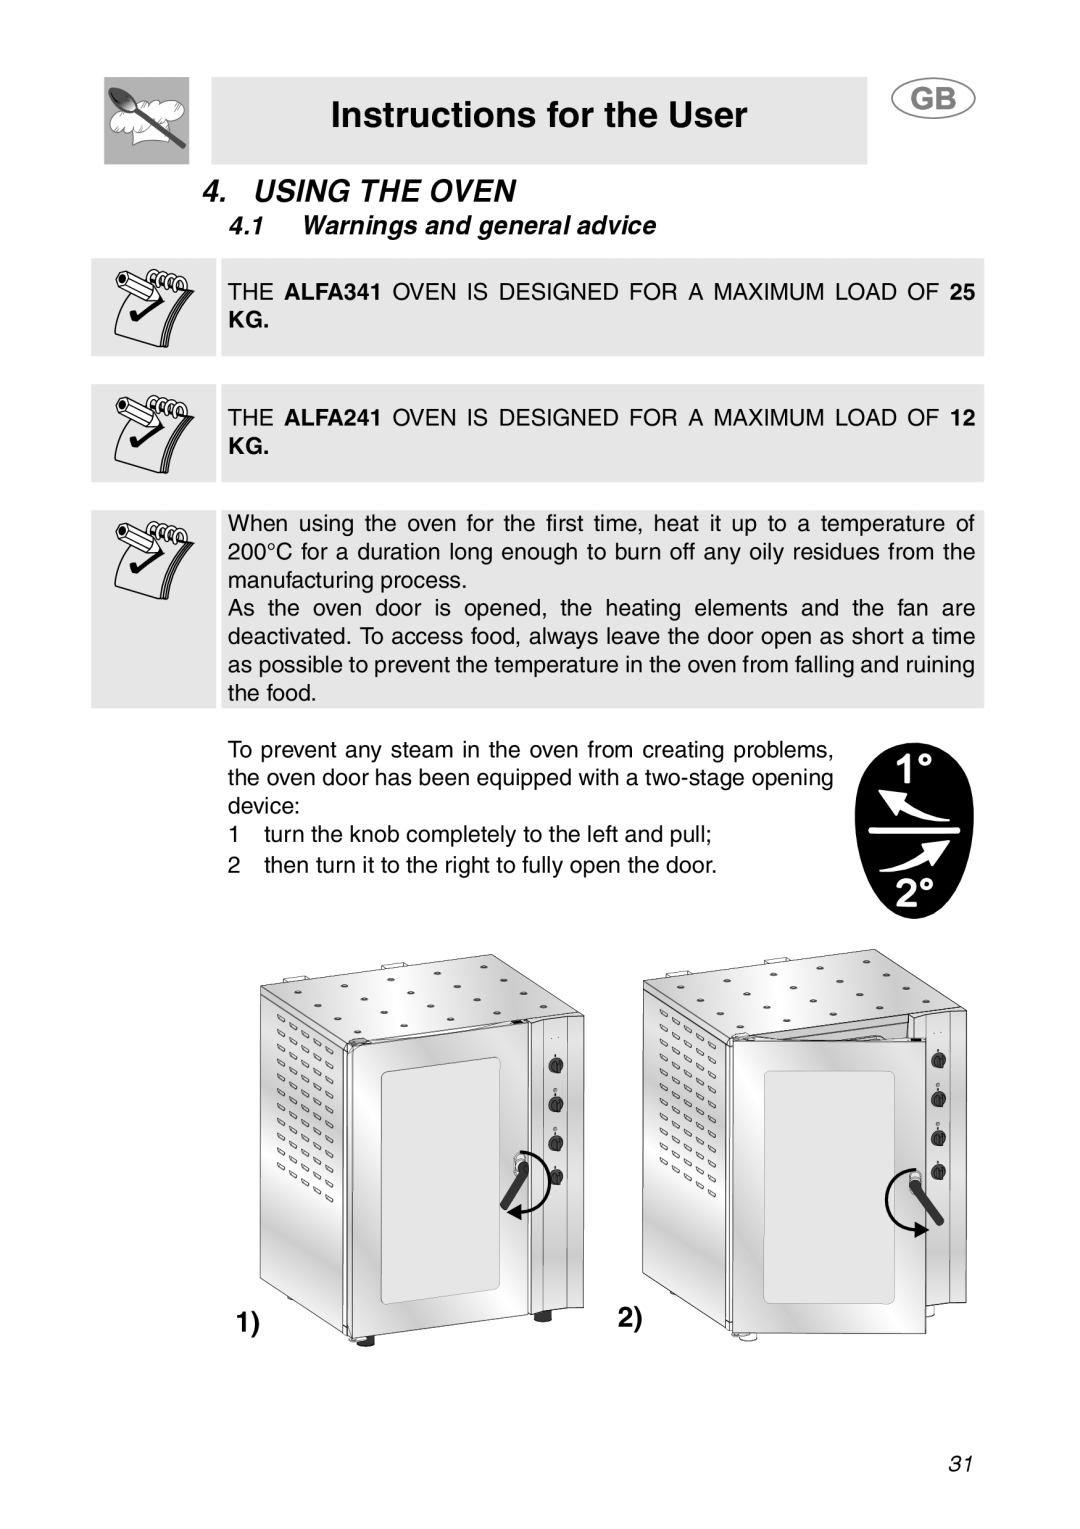 Smeg ALFA341XM manual Using The Oven, Warnings and general advice, Instructions for the User 